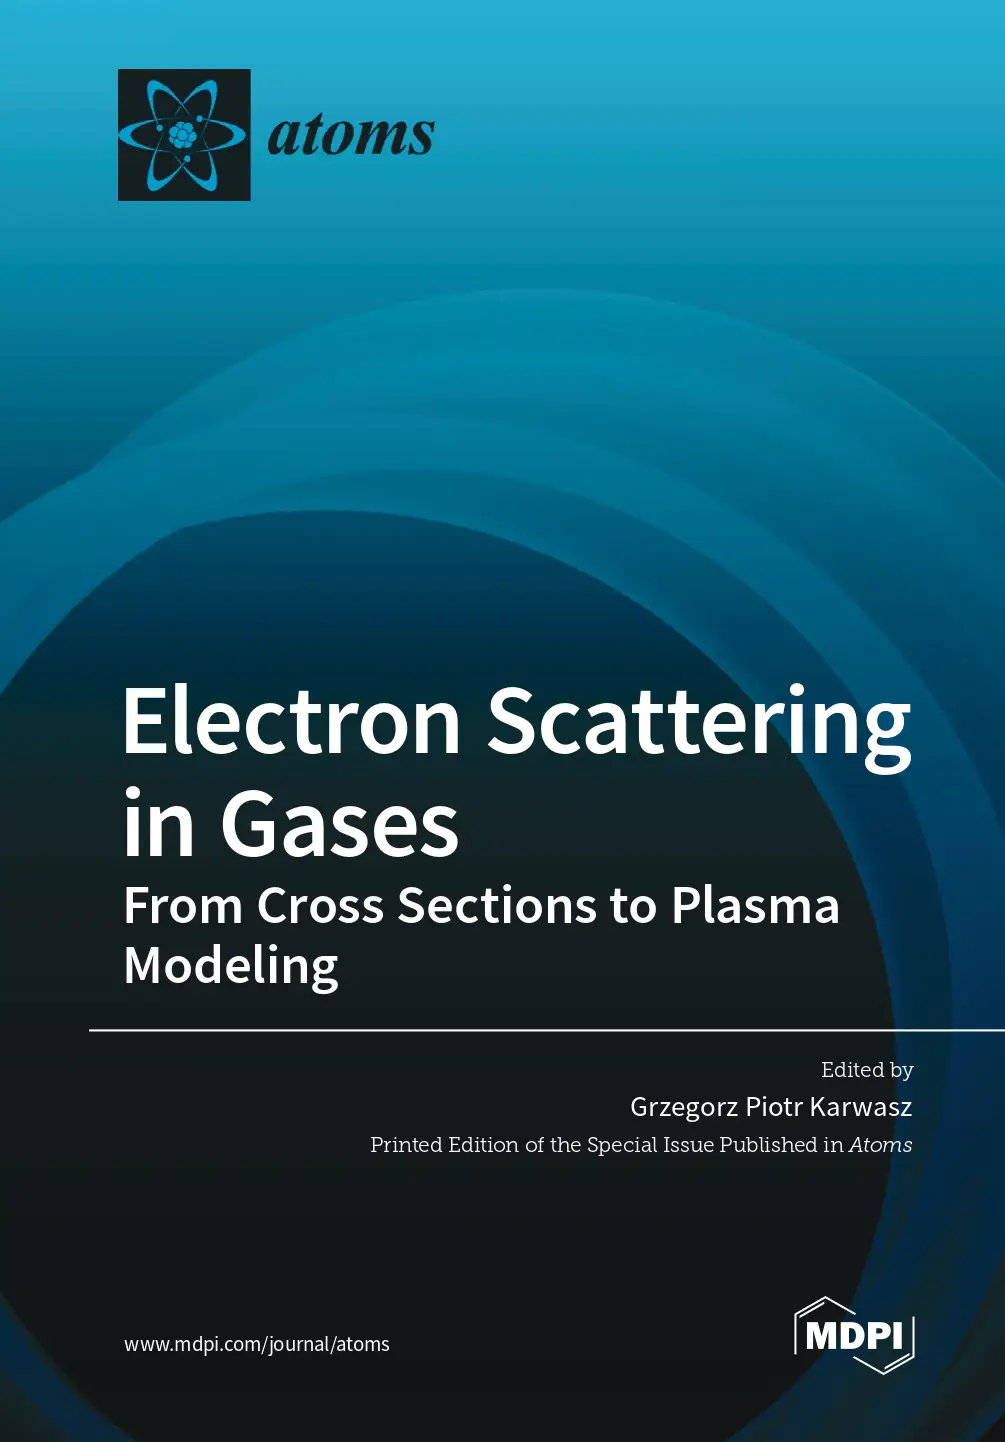 Electron Scattering in Gases